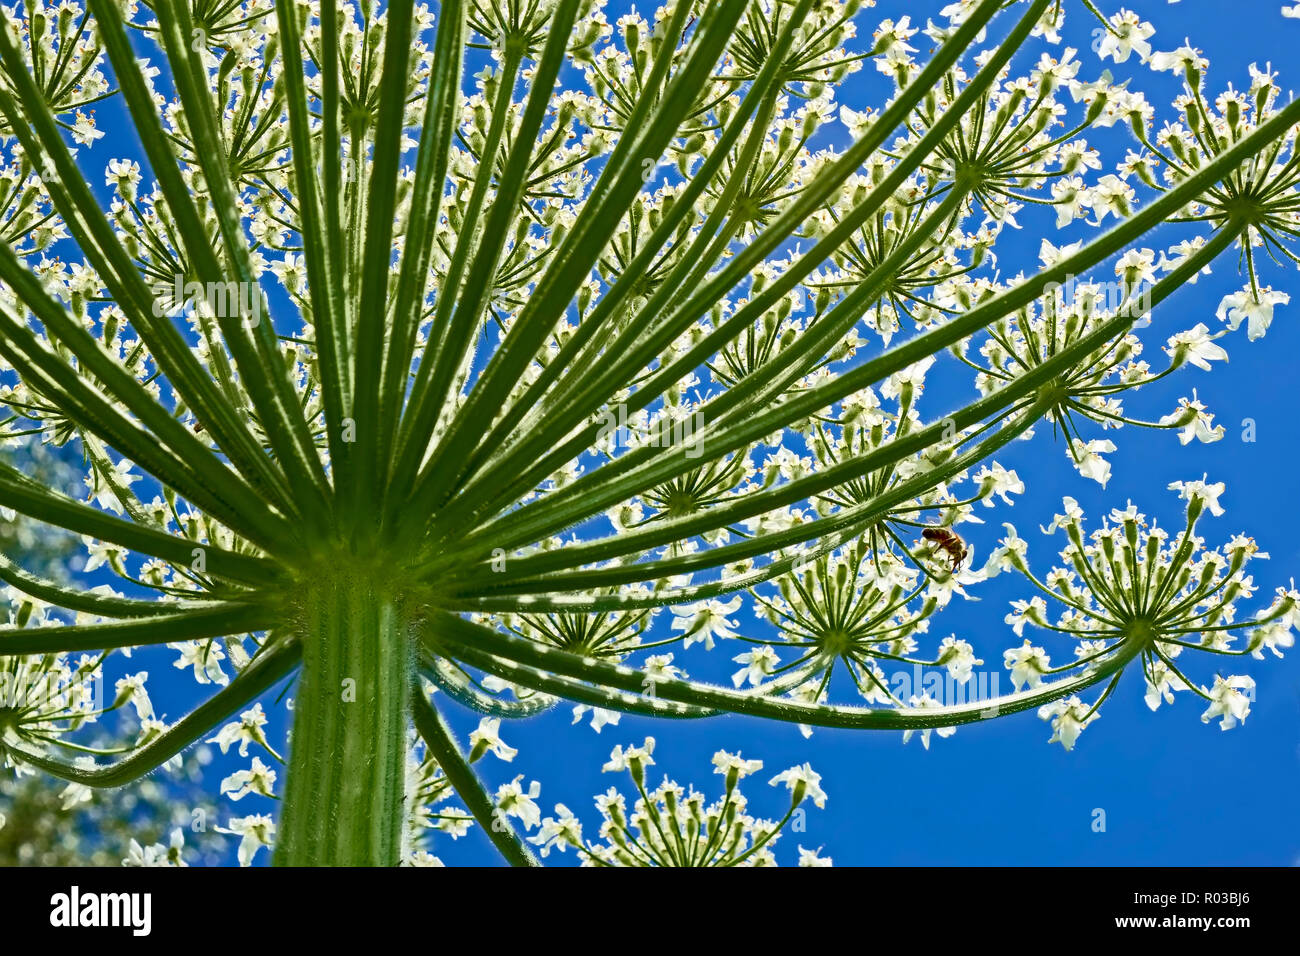 Giant inflorescence of Hogweed plant against blue sky. View from below. Latin name: heracleum sphondylium Stock Photo